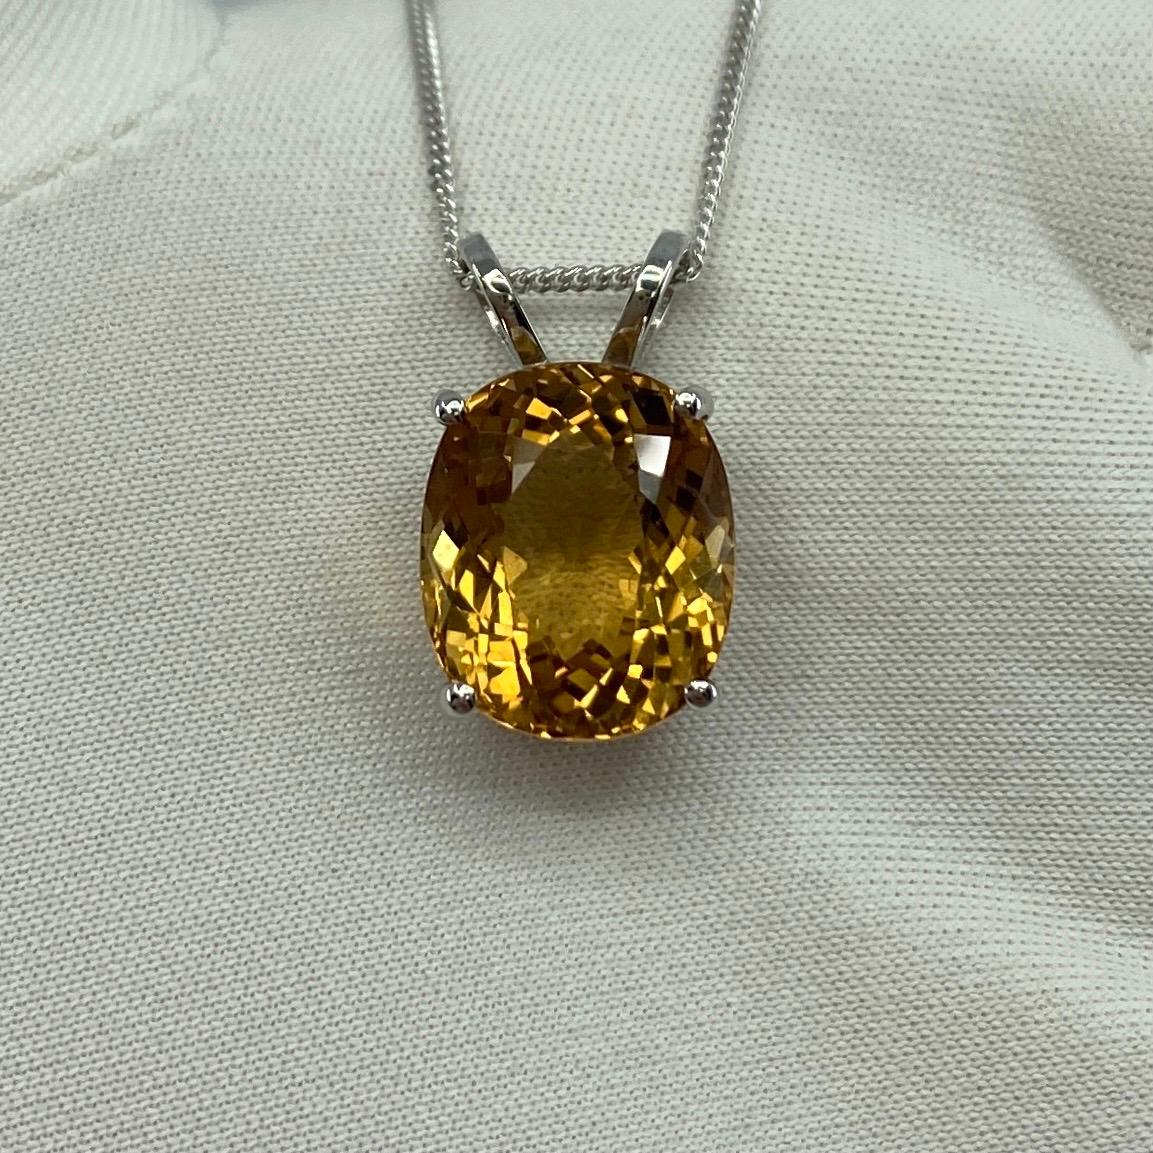 Women's or Men's 6.05ct Vivid Yellow Heliodor Golden Beryl Oval 18k White Gold Pendant Necklace For Sale